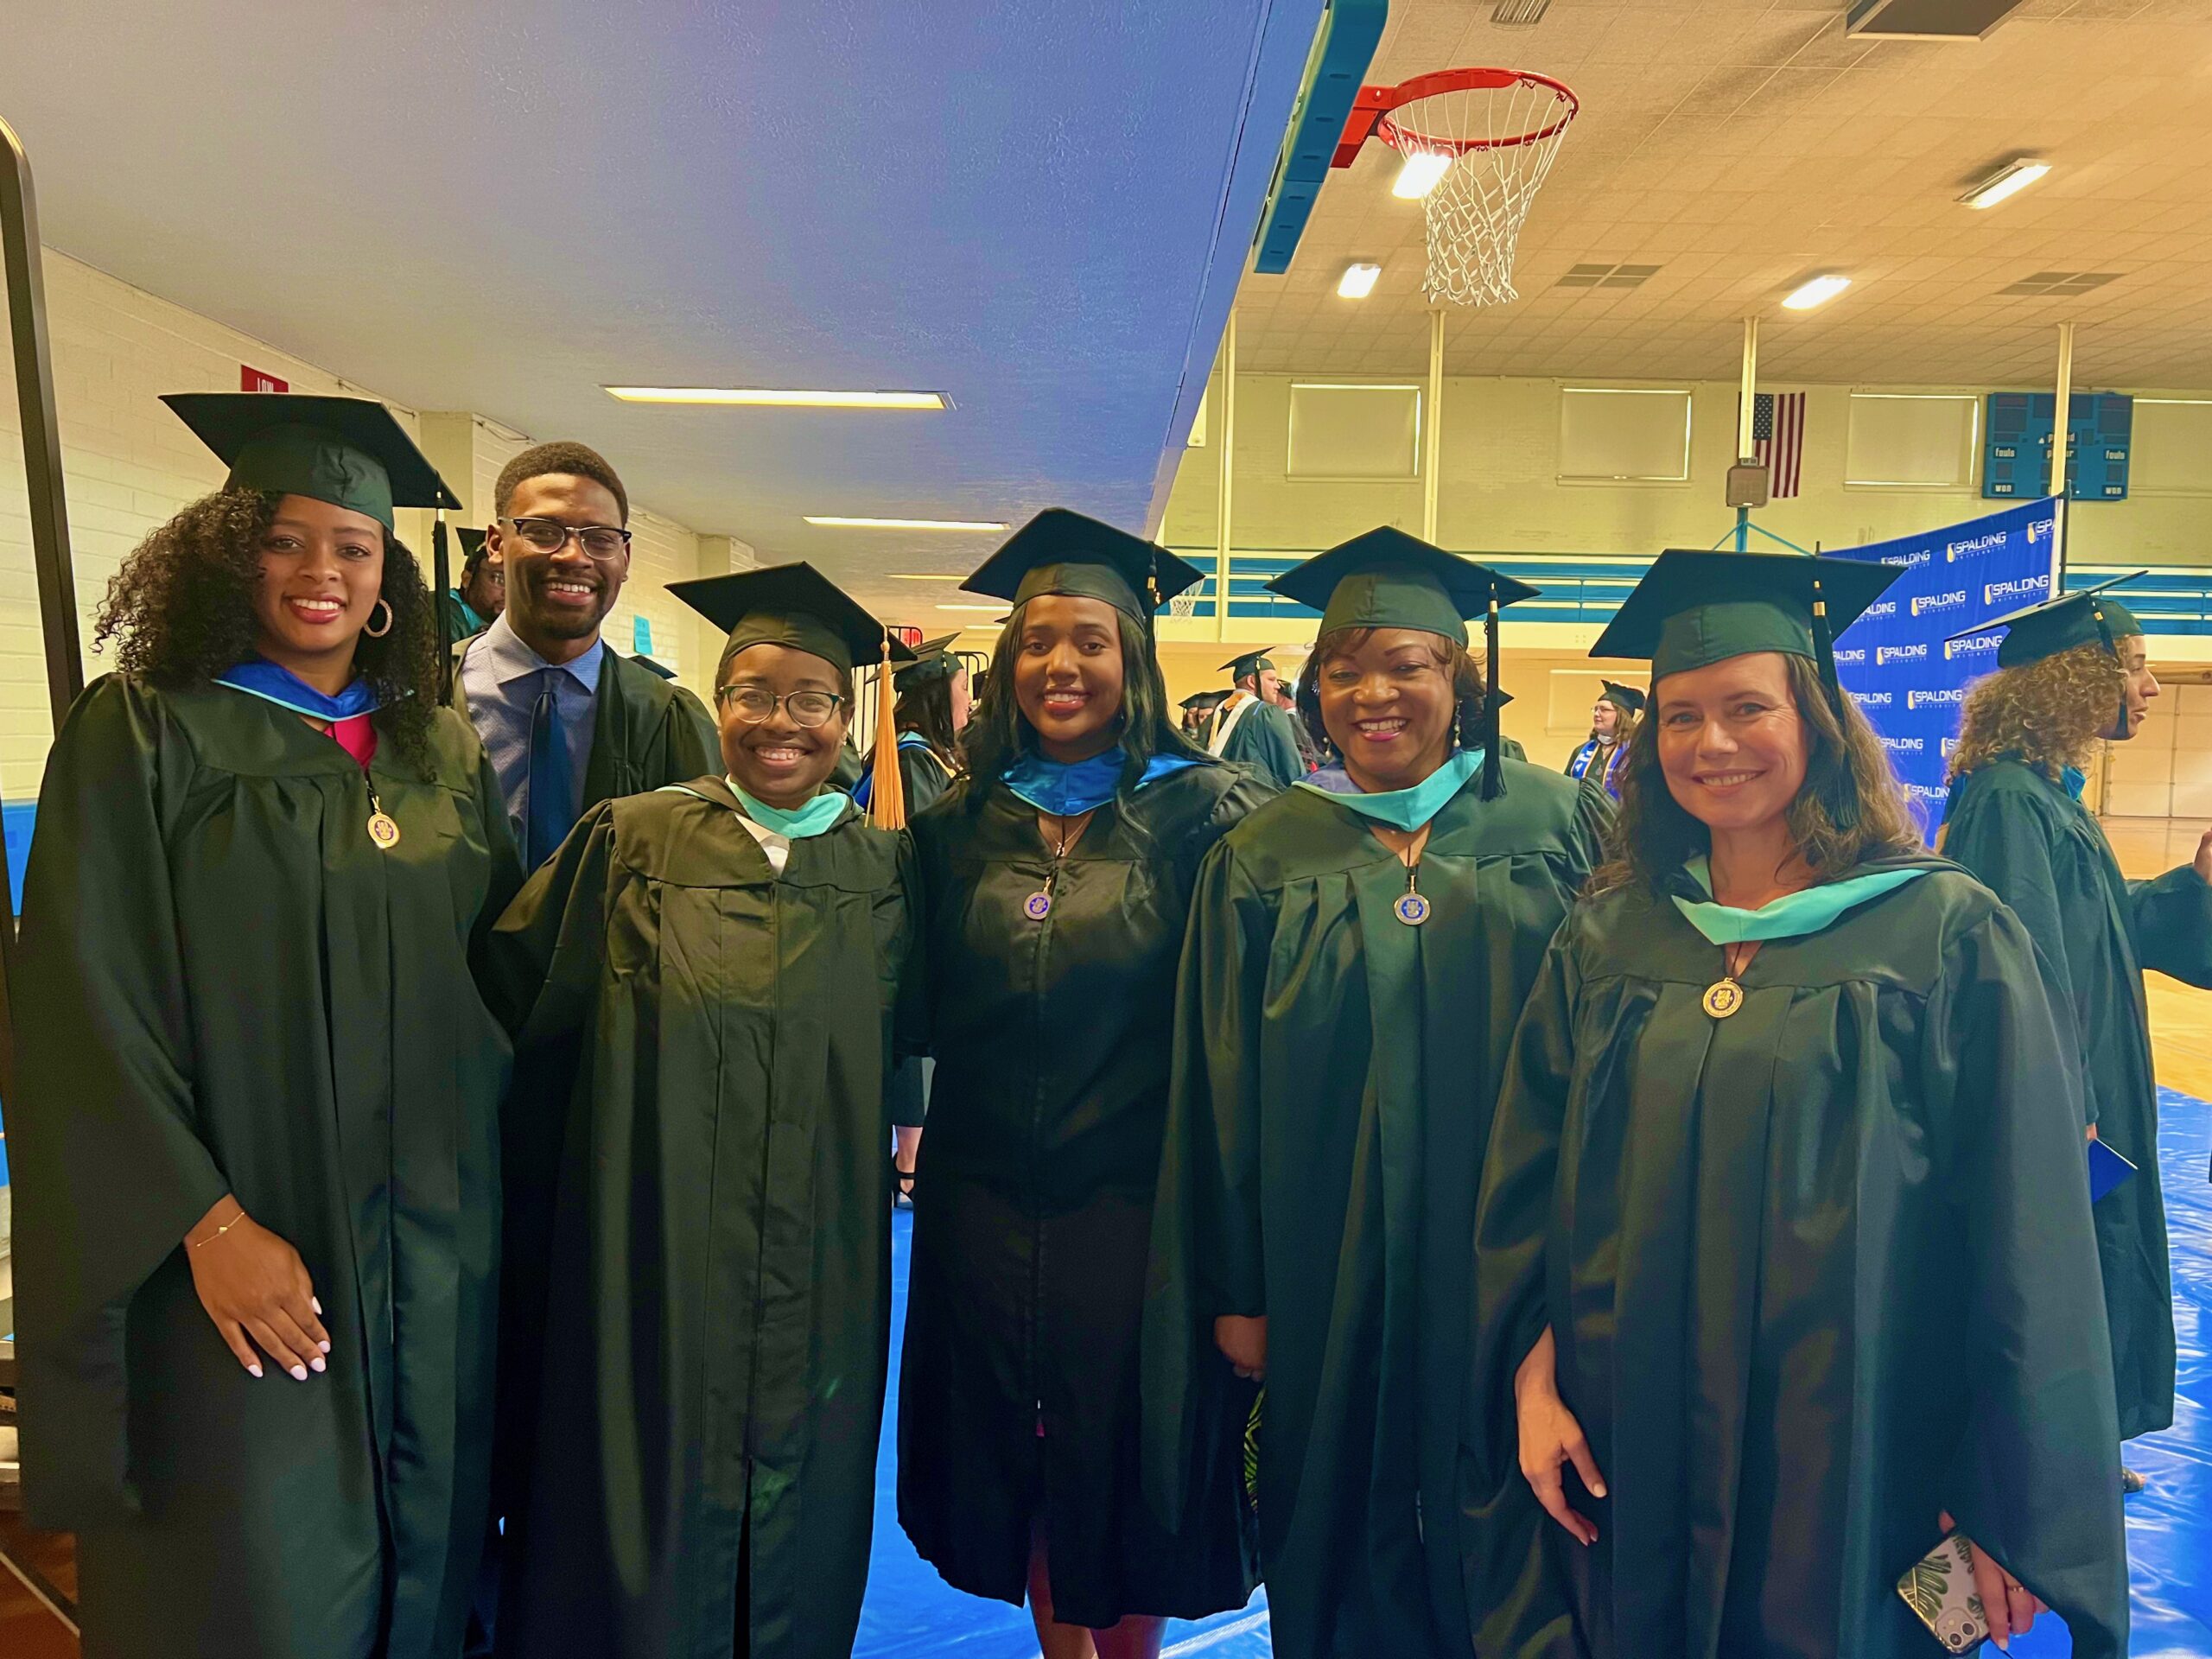 Group of Spalding master's graduates posing for picture in Columbia Gym